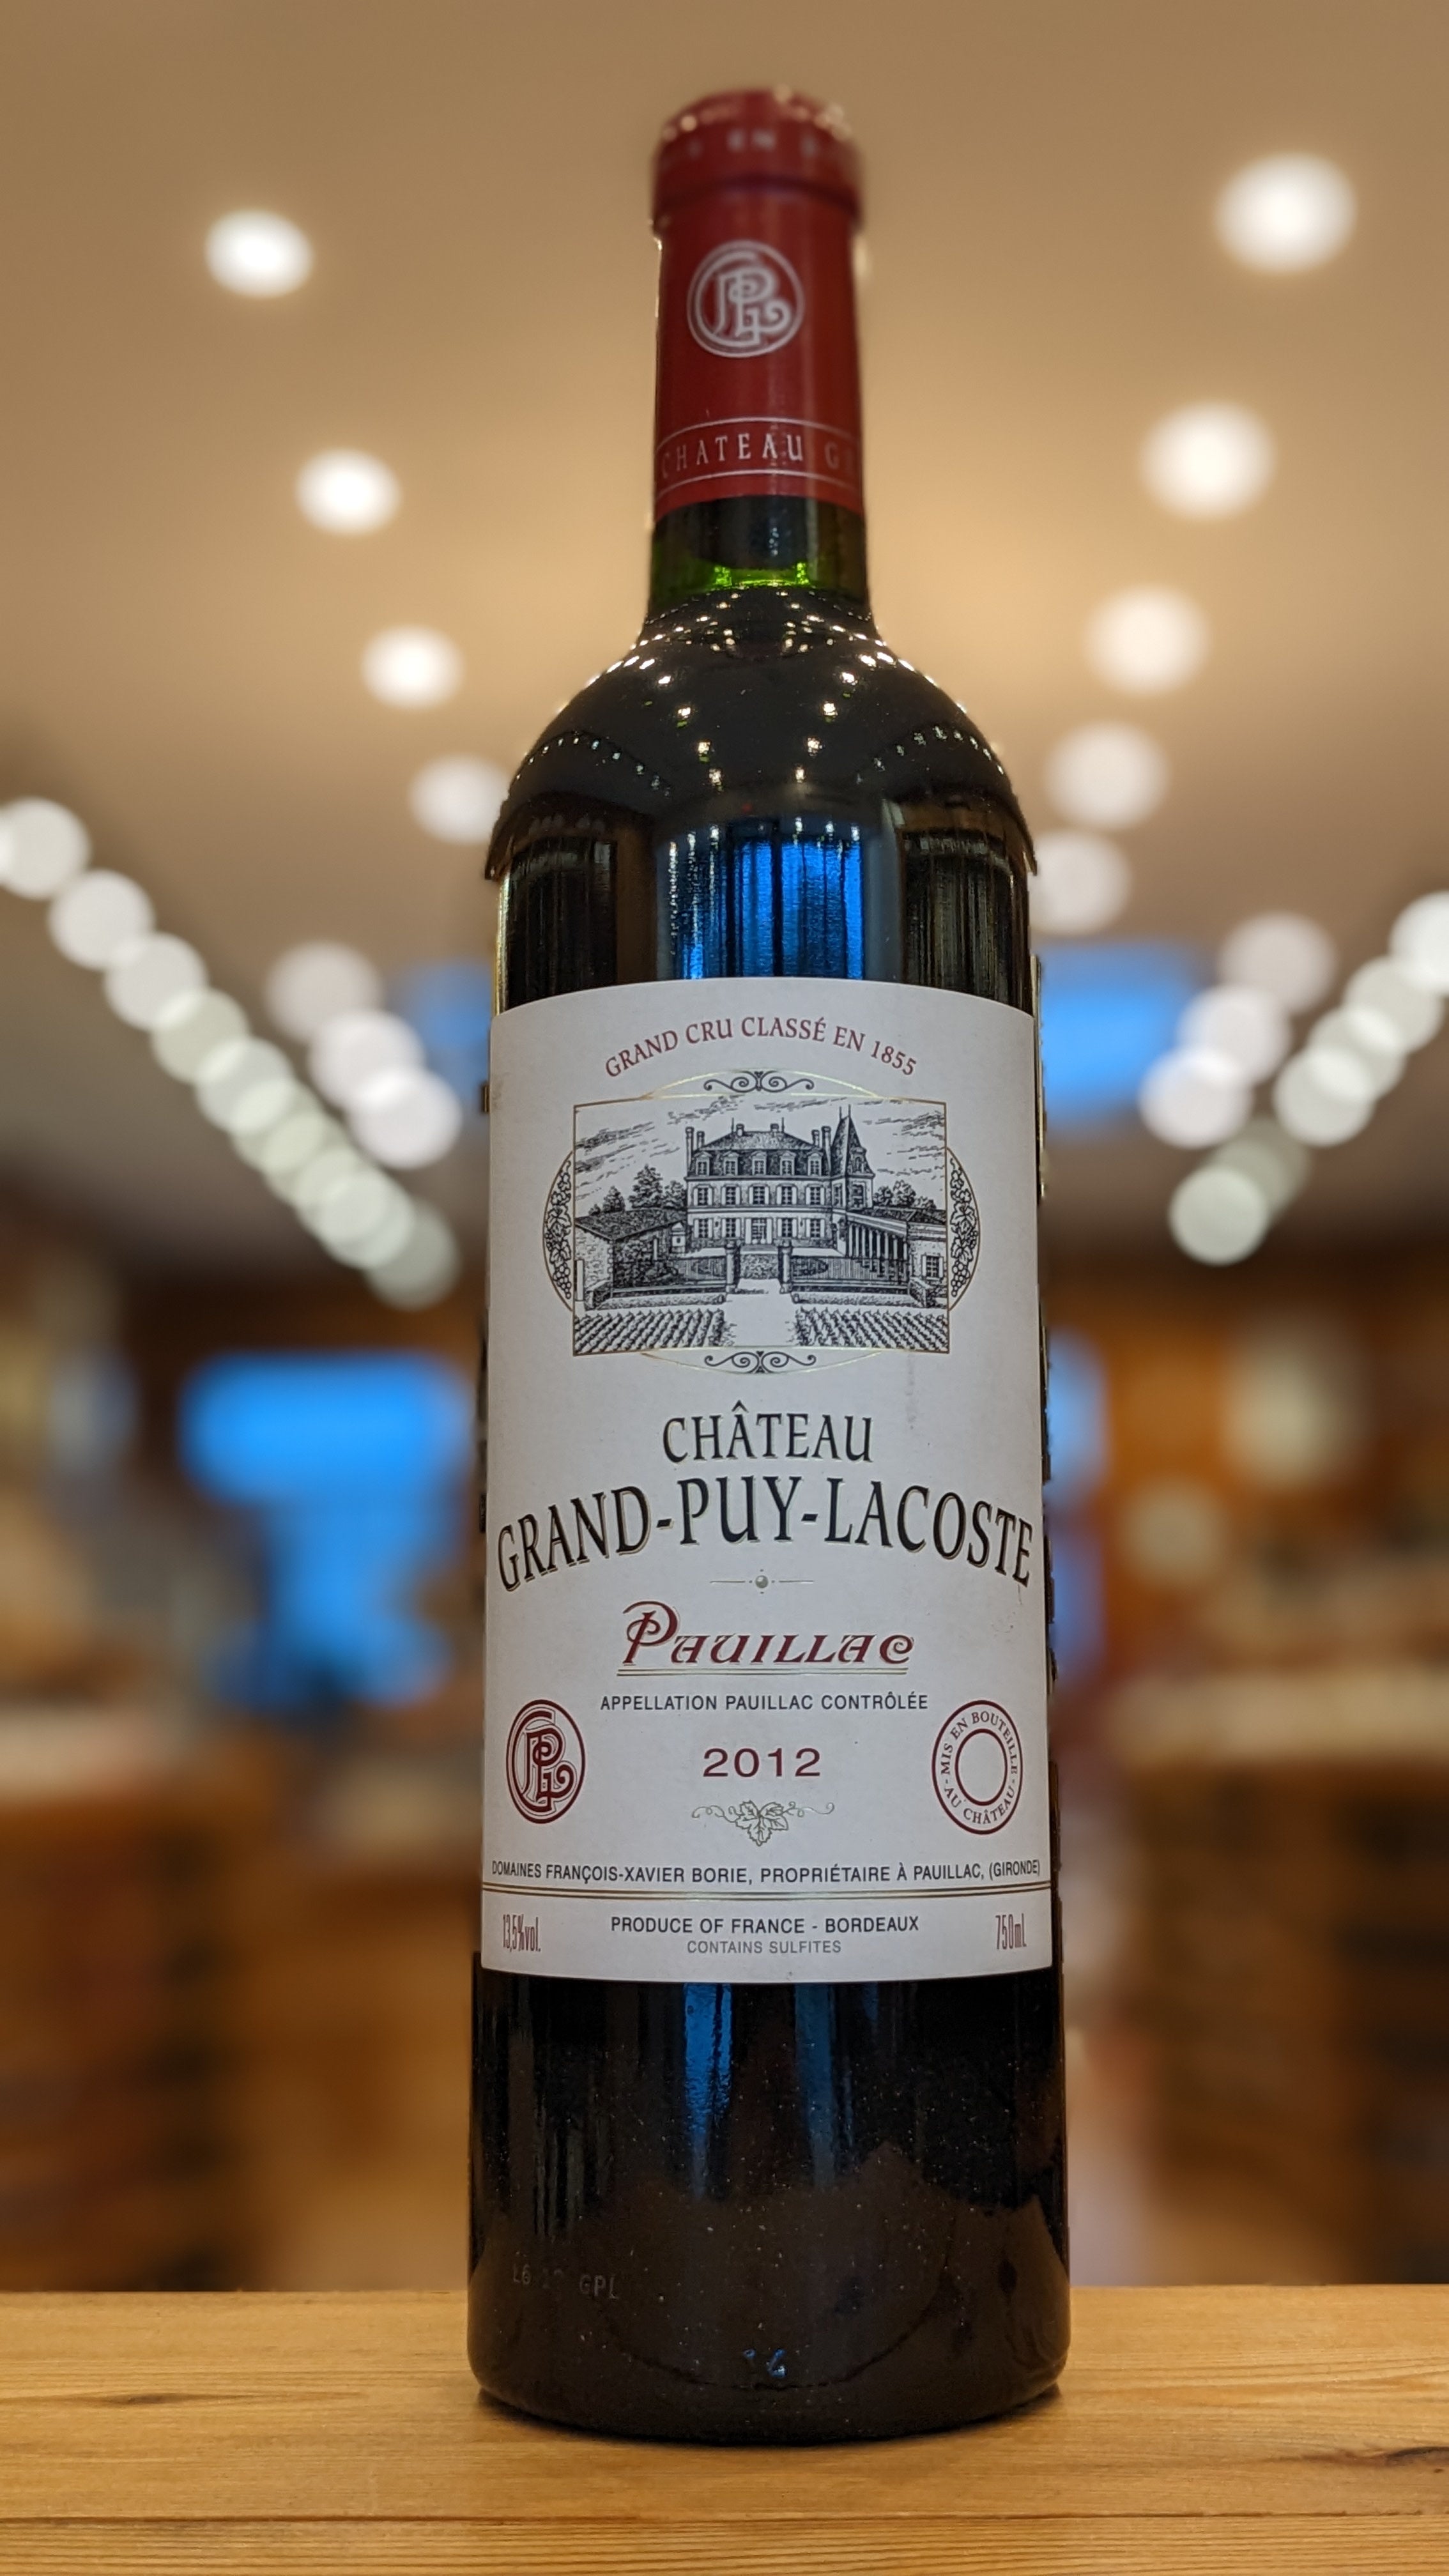 Siesta tro jeg behøver Chateau Grand-Puy-Lacoste Pauillac 2012 – Horseneck Wine and Spirits